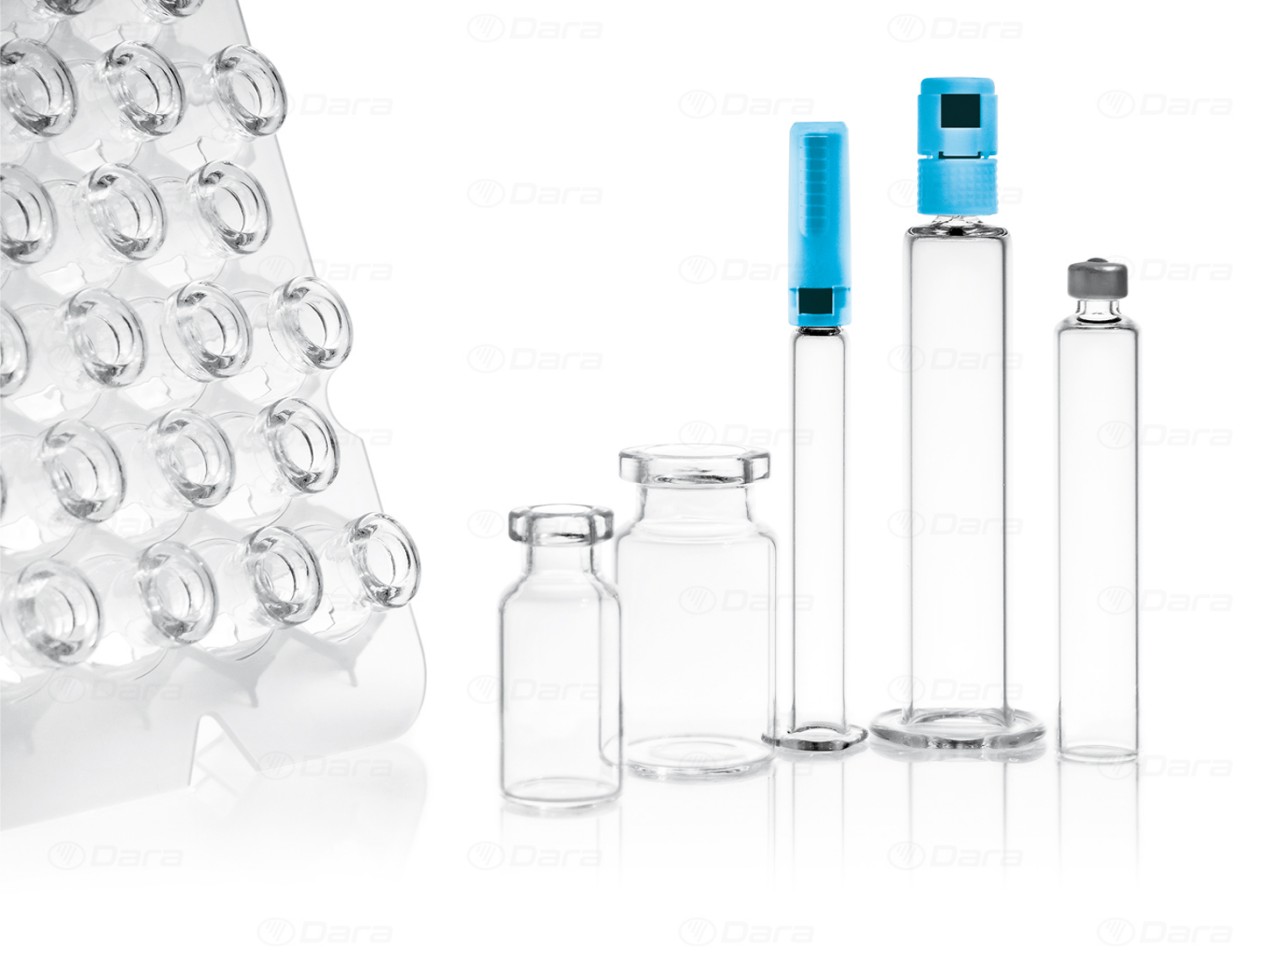 Fillers – cappers for vials, syringes and cartridges in "Nest"